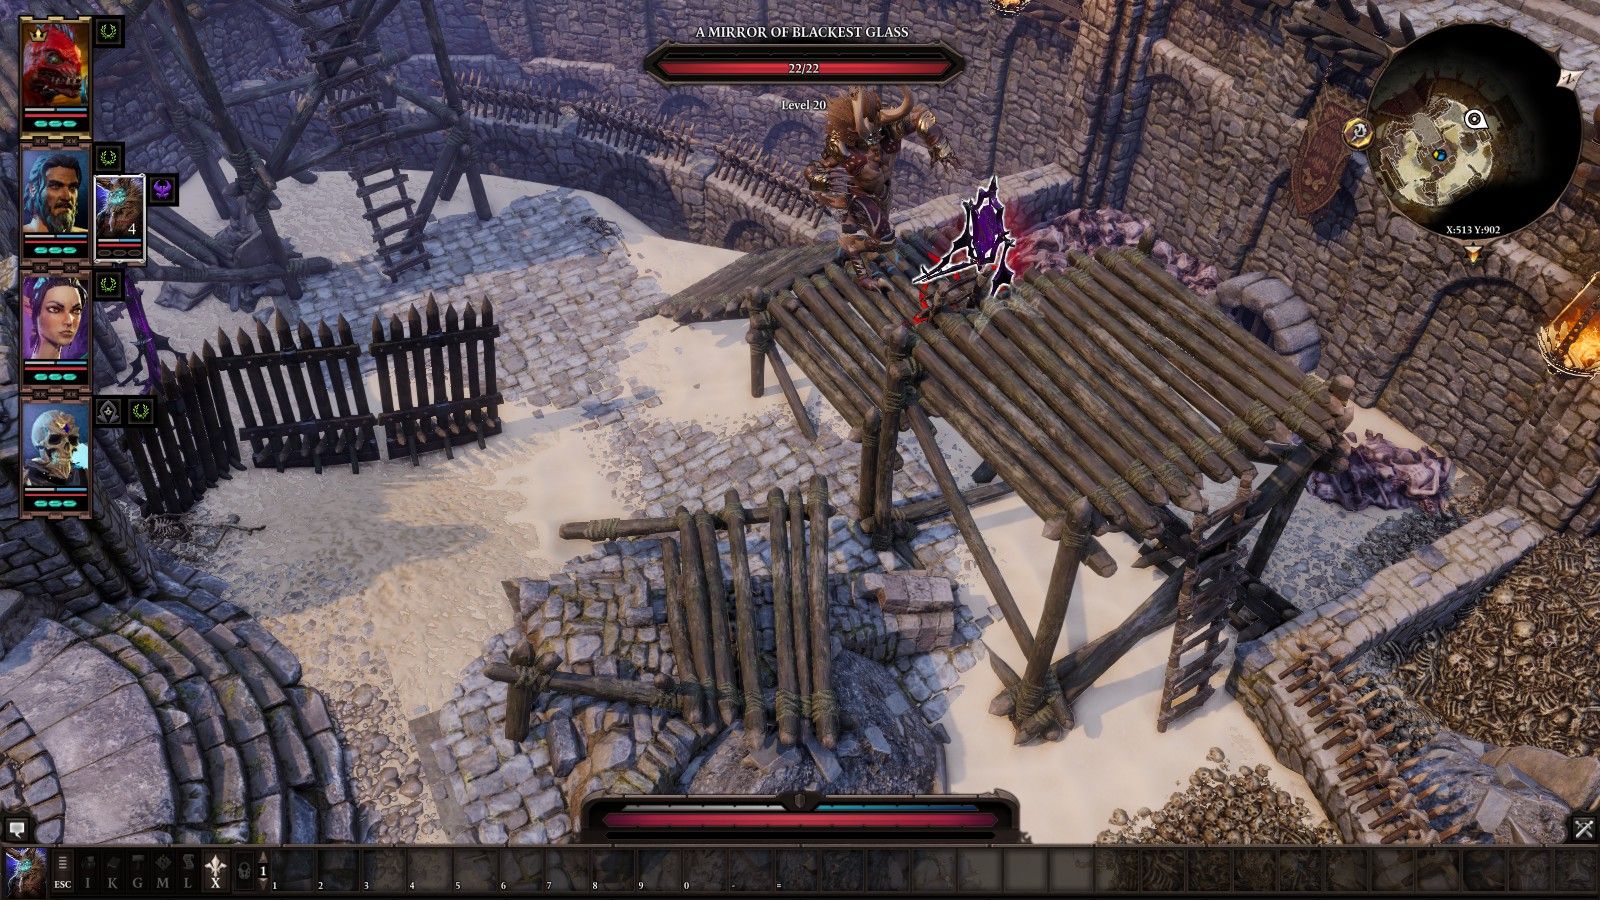 Cheating the Arena with Summons Divinity Original Sin 2